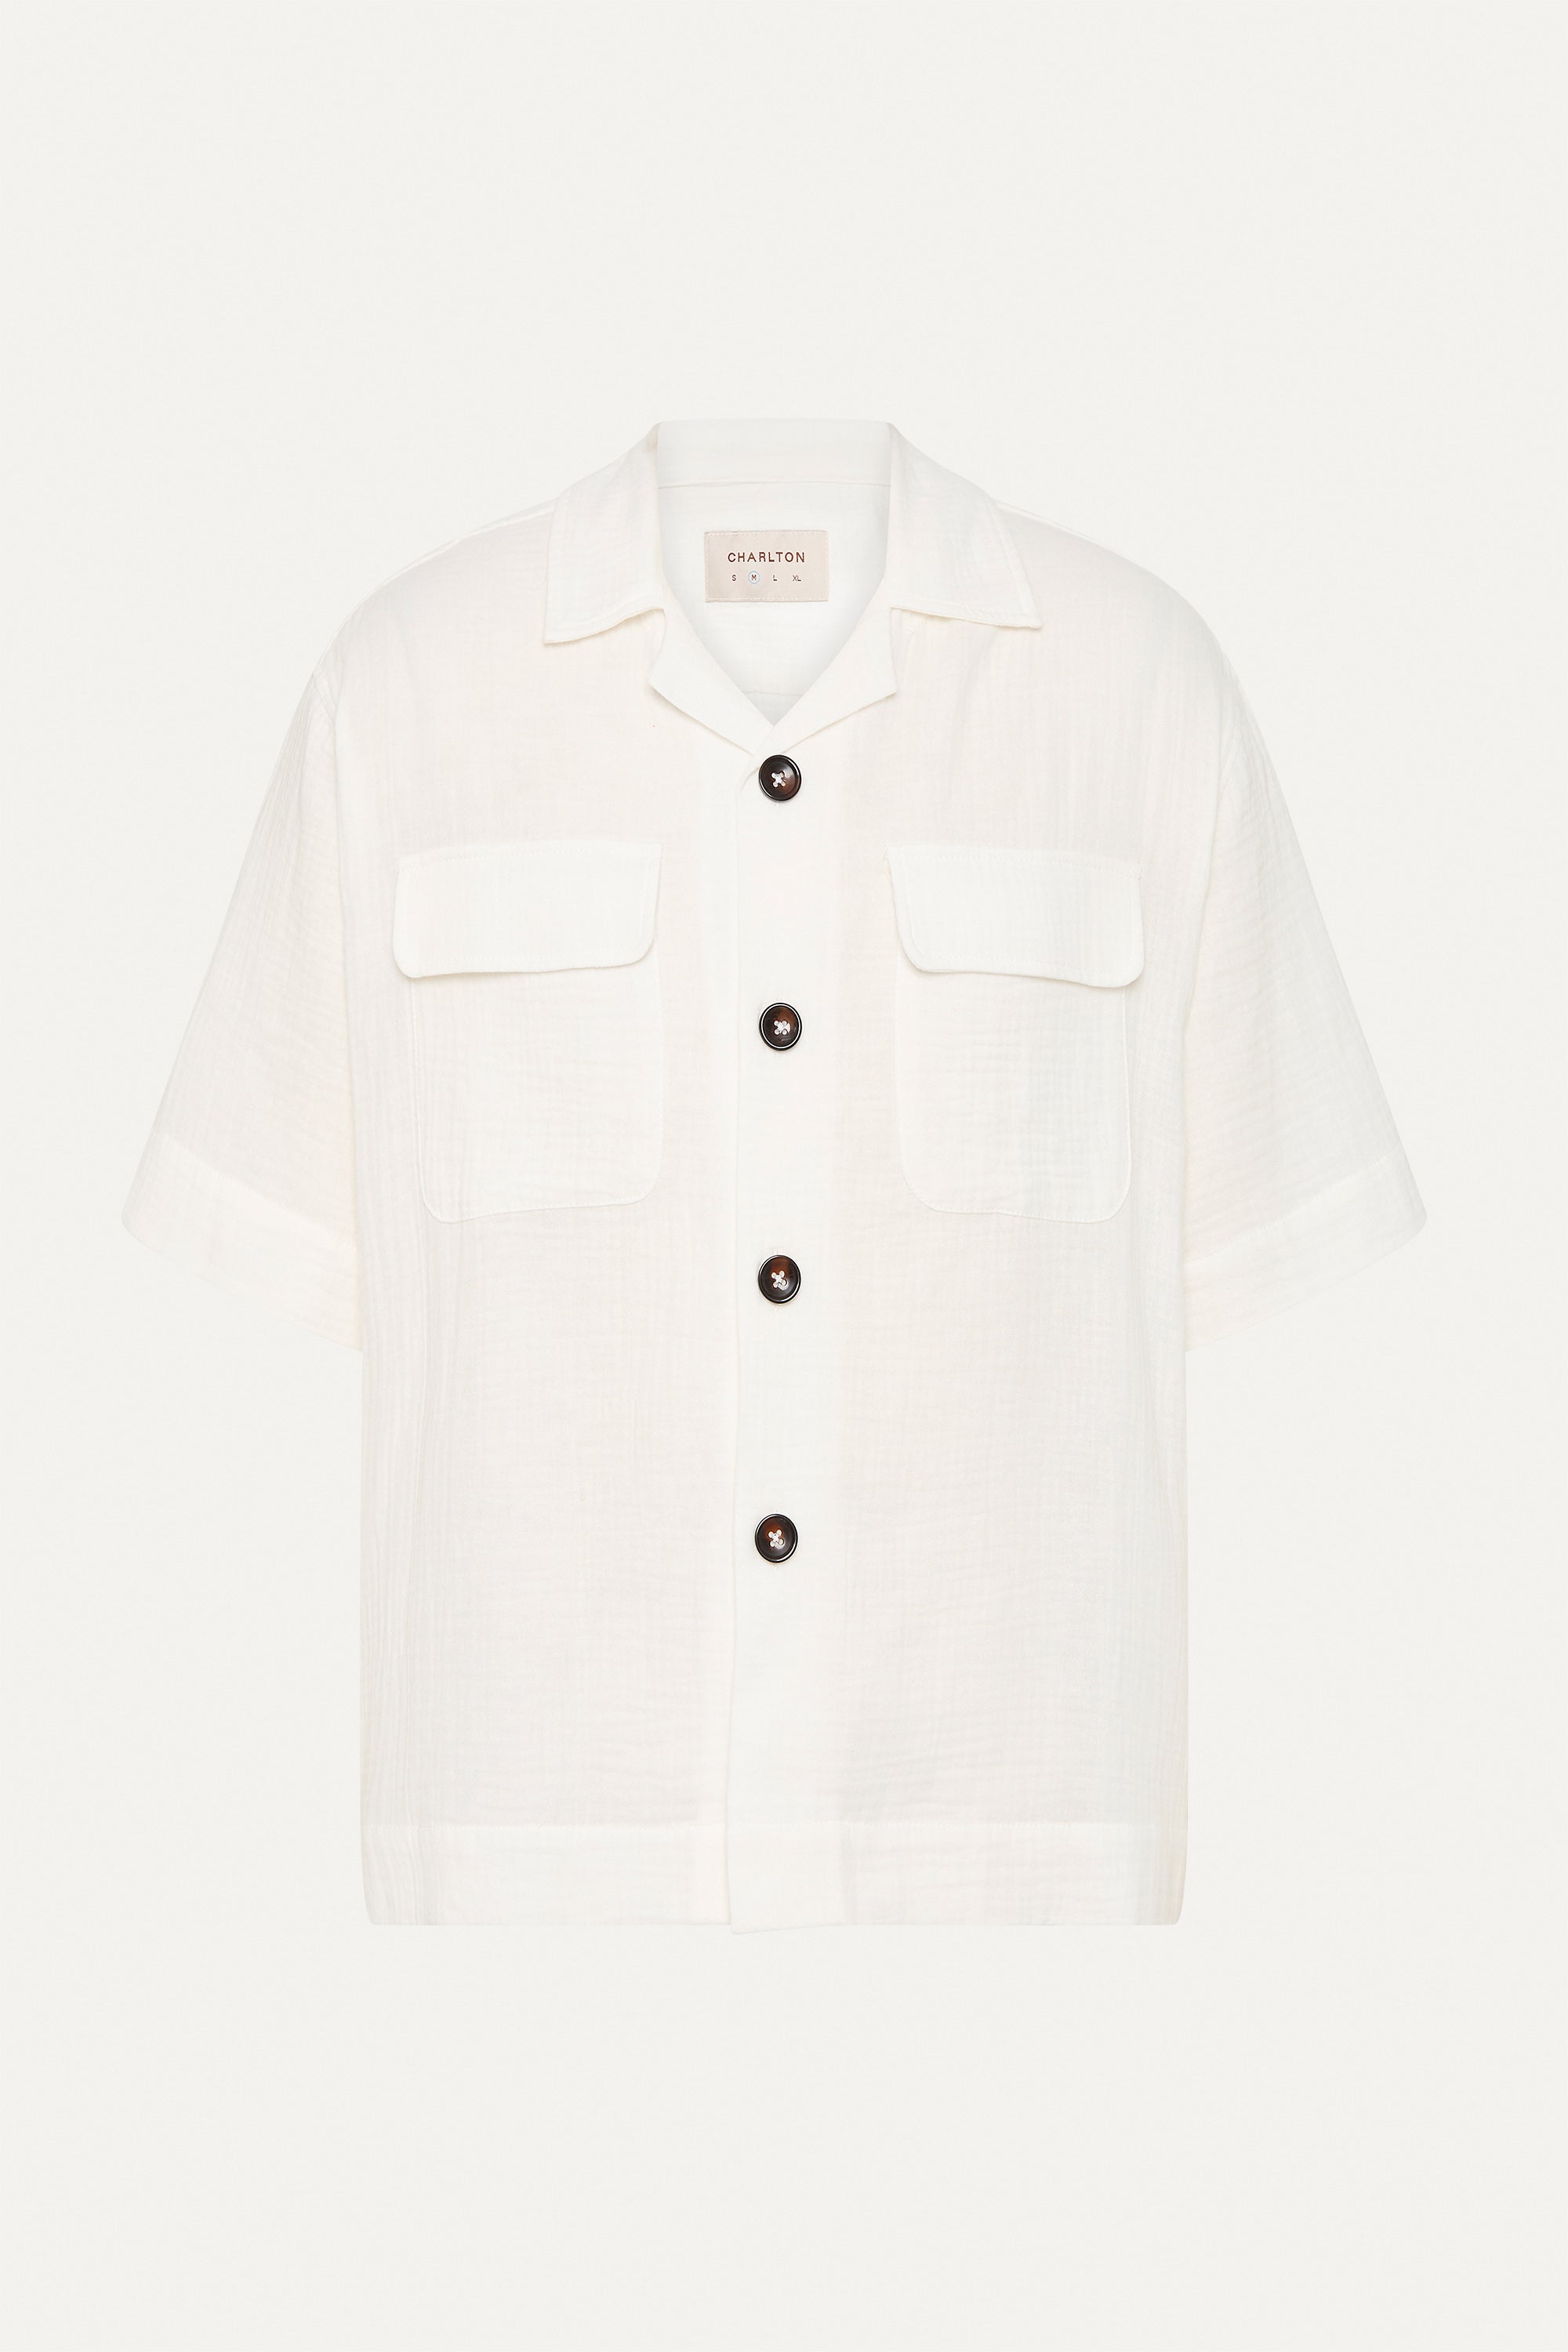 Double Pocket Wave Shirt in Cream Cotton